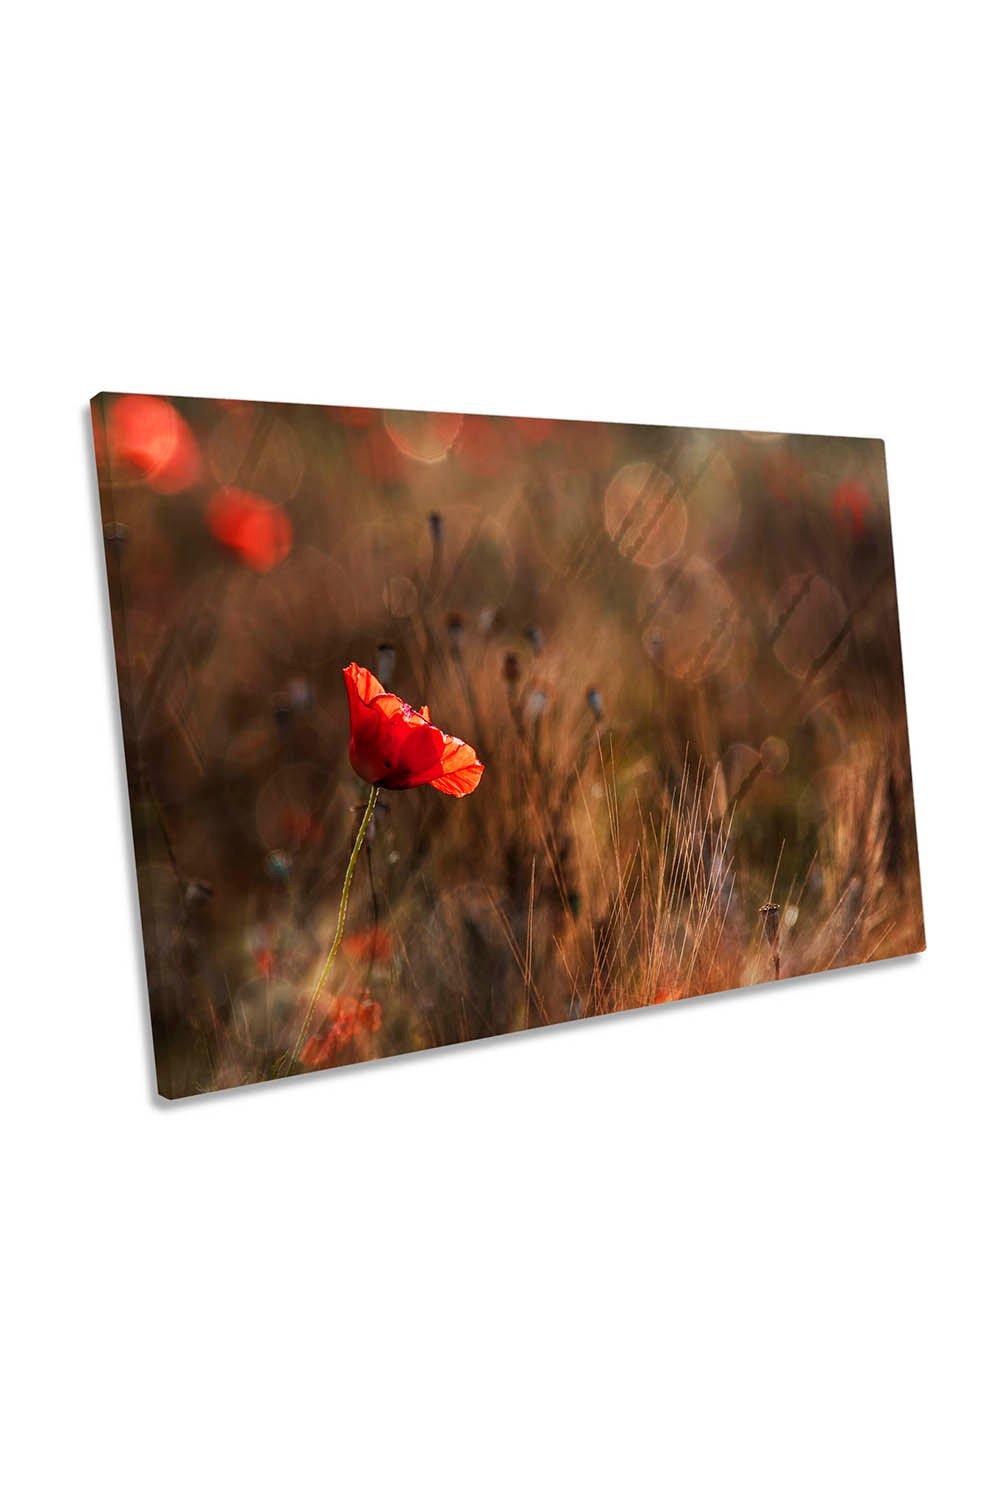 Red Poppy Flower Meadow Canvas Wall Art Picture Print